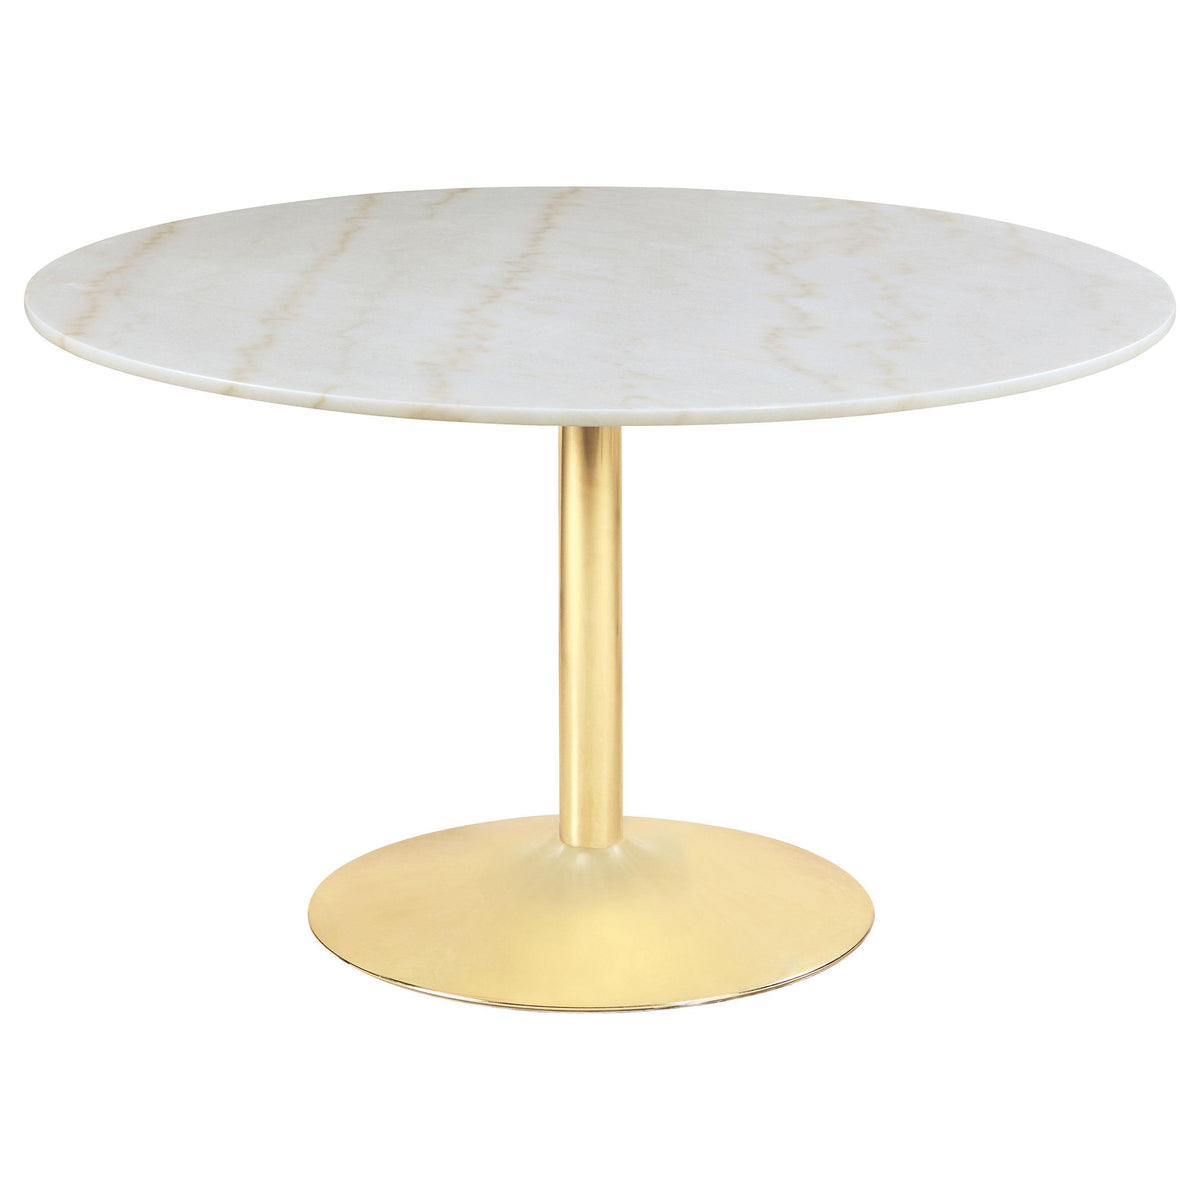 Kella Round Marble Top Dining Table White and Gold  Half Price Furniture